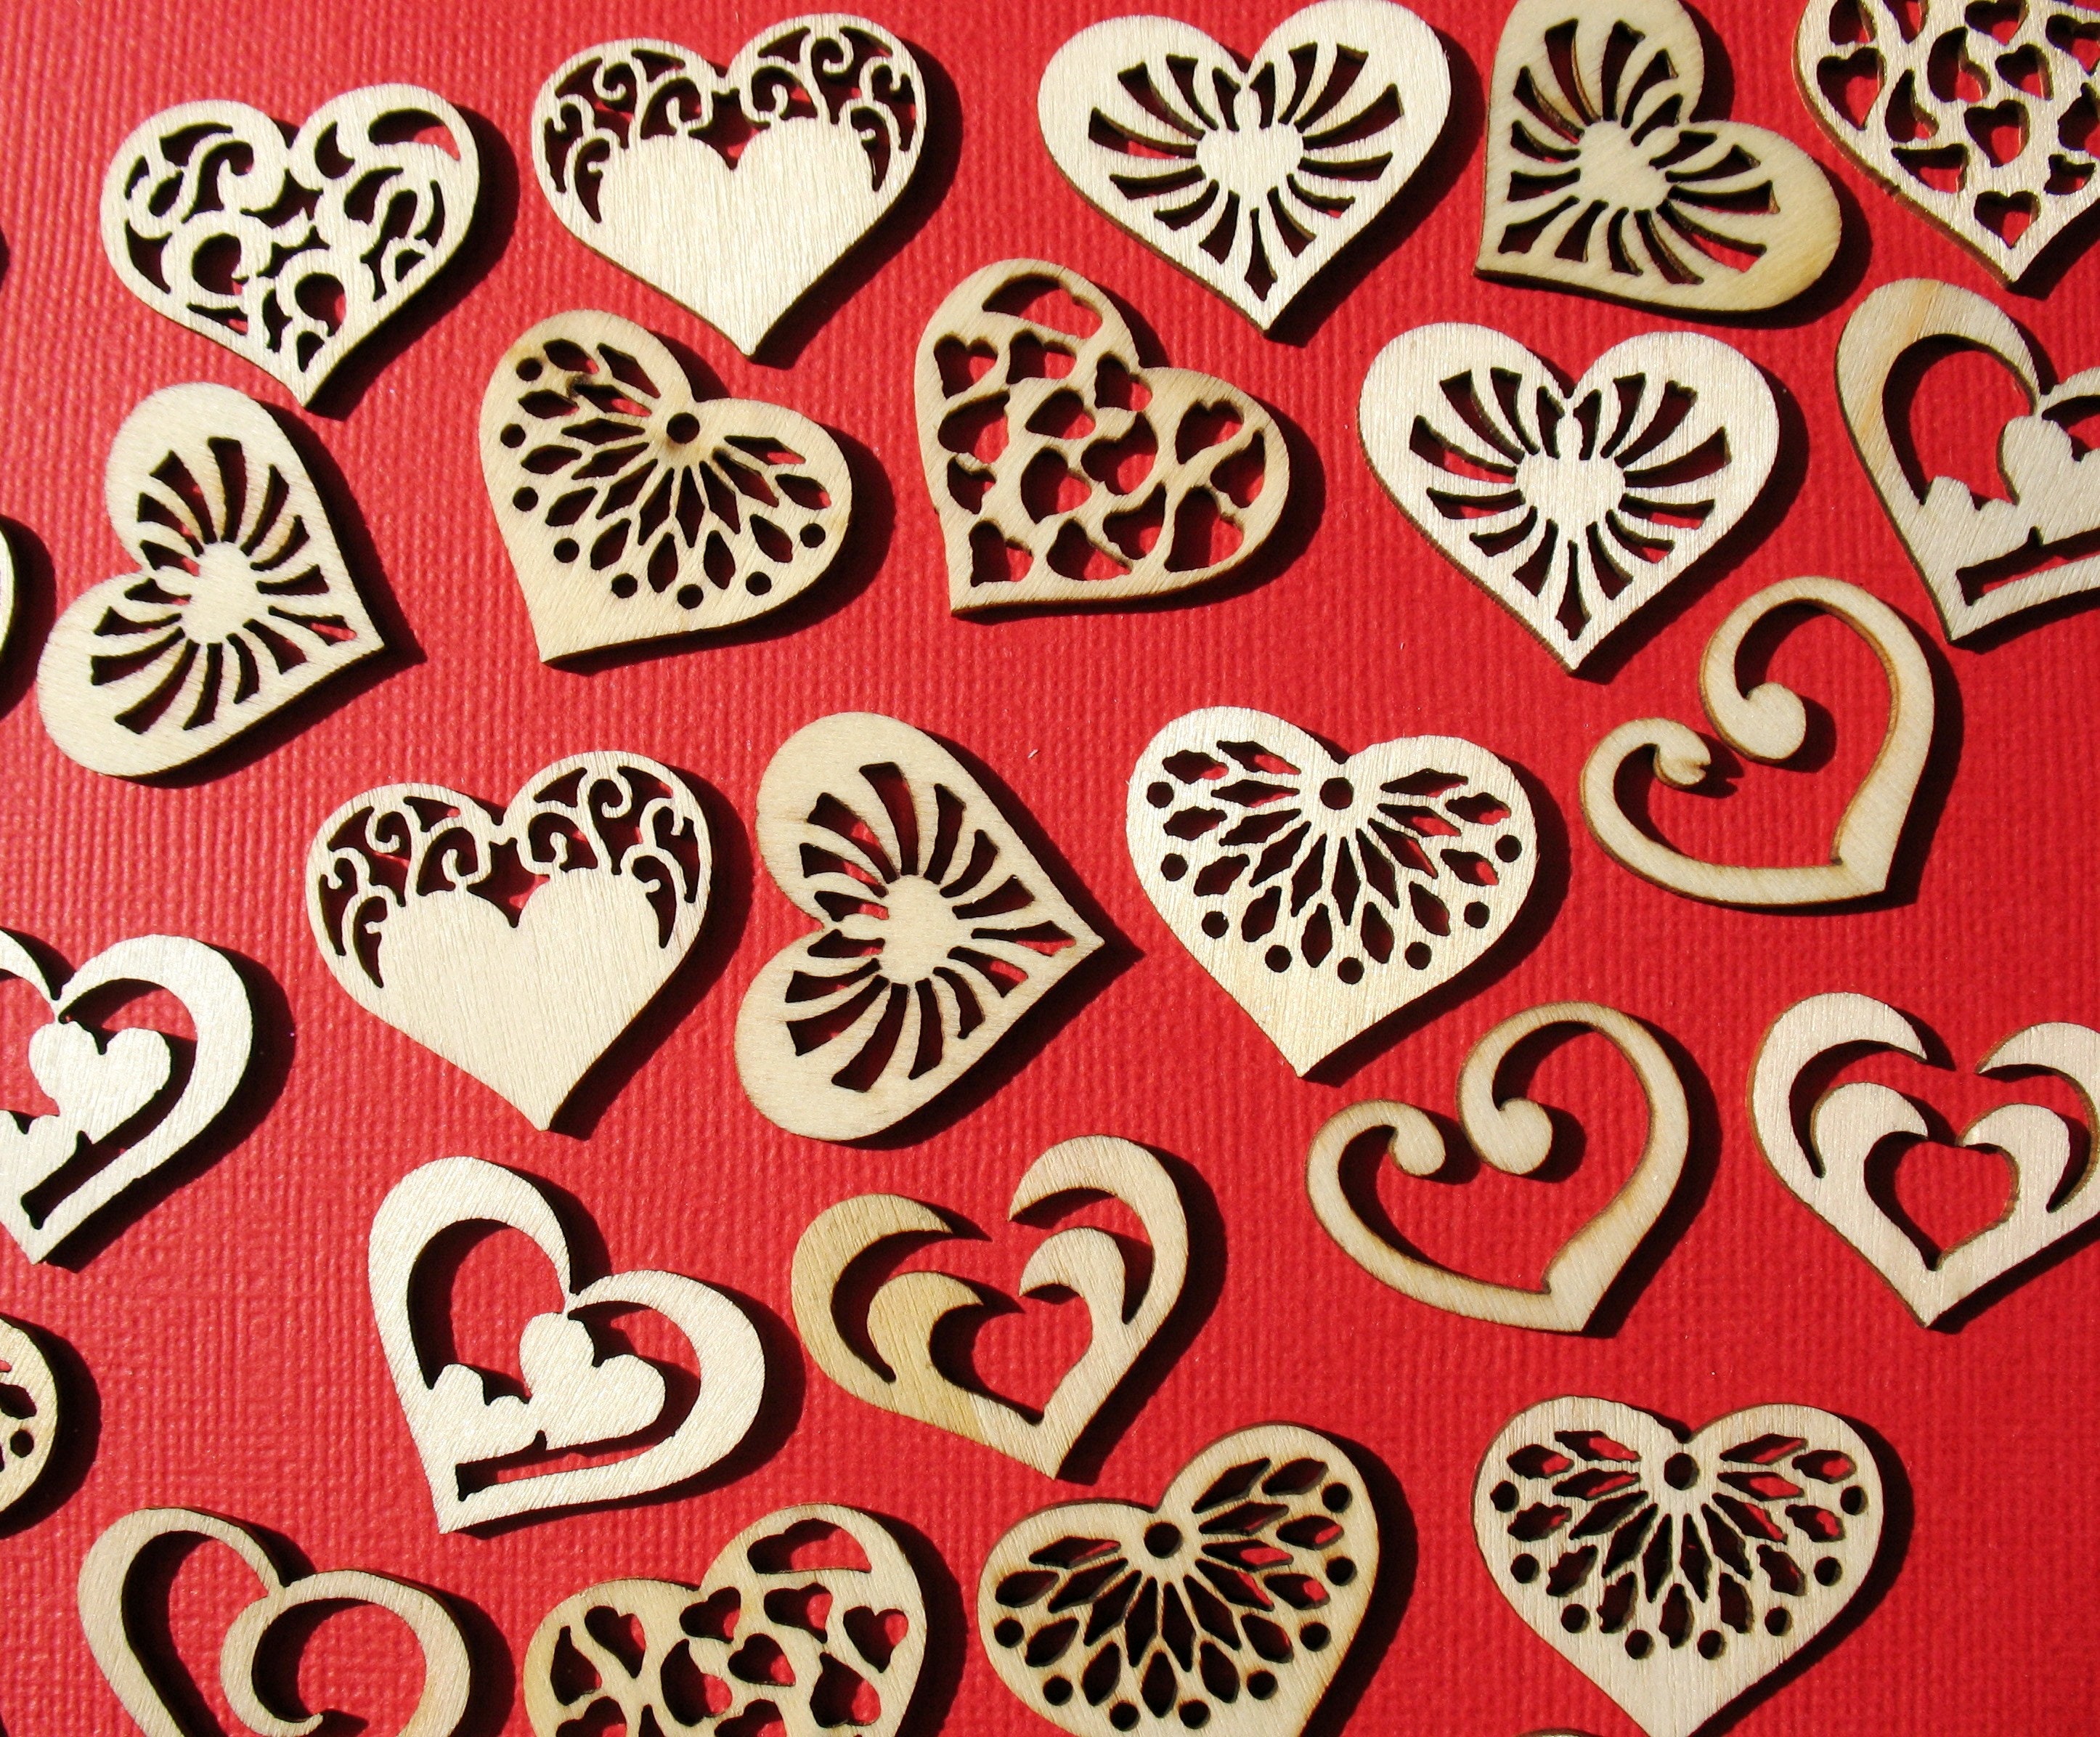 Lasercut Wood Embellishments Apx 20 For Crafts Intricate HEARTS 